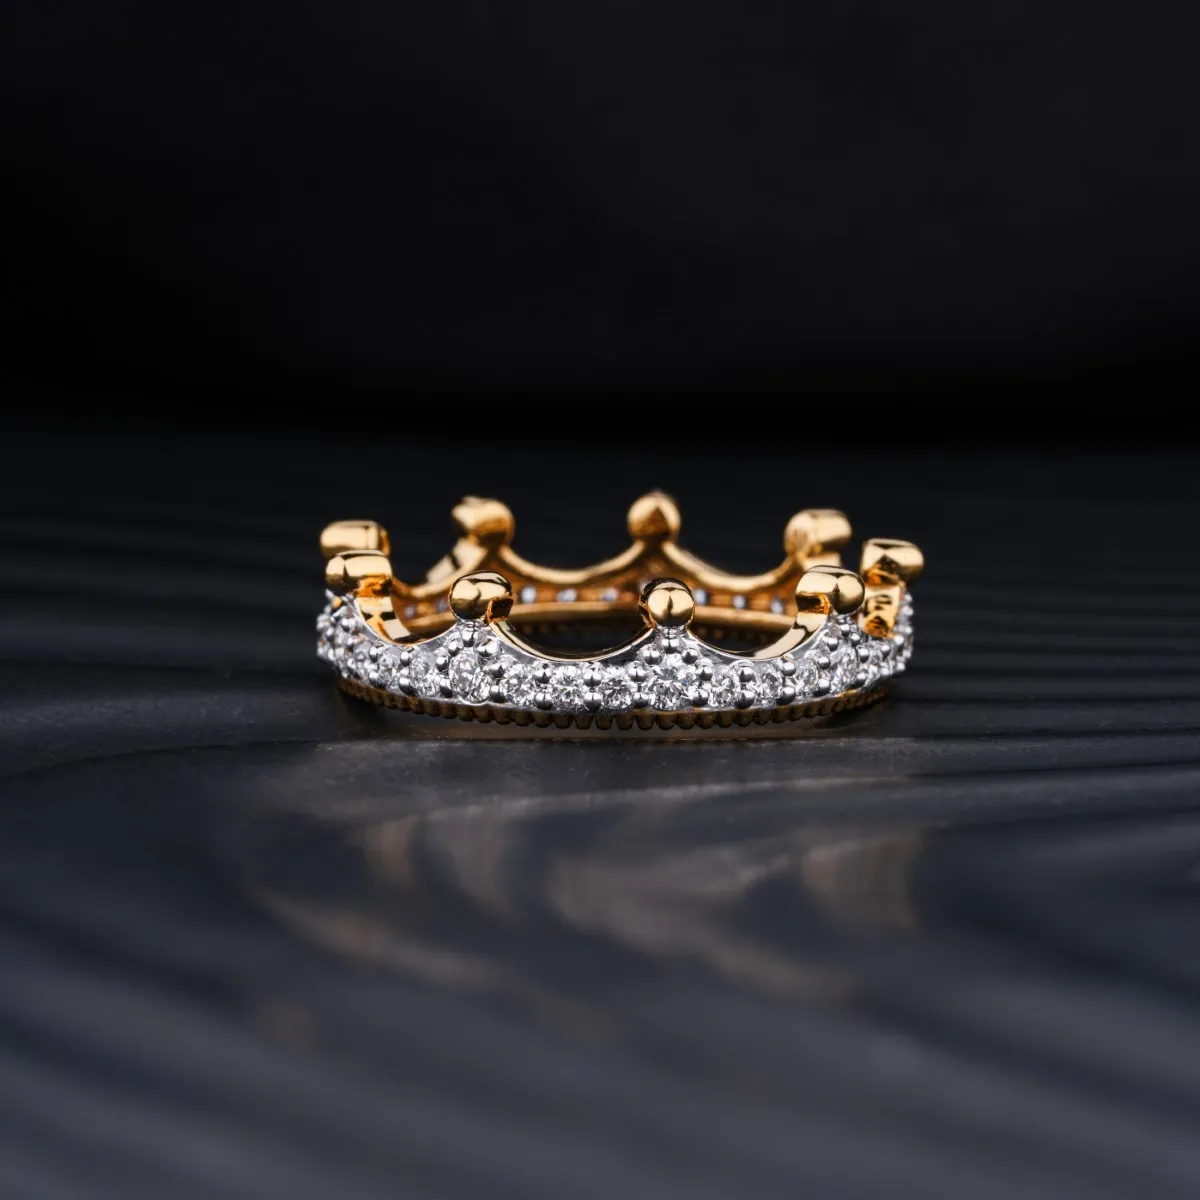 Crown Shaped Ring | Queen Crown Ring | Crown Design Gold Ring | Earthly Jewels